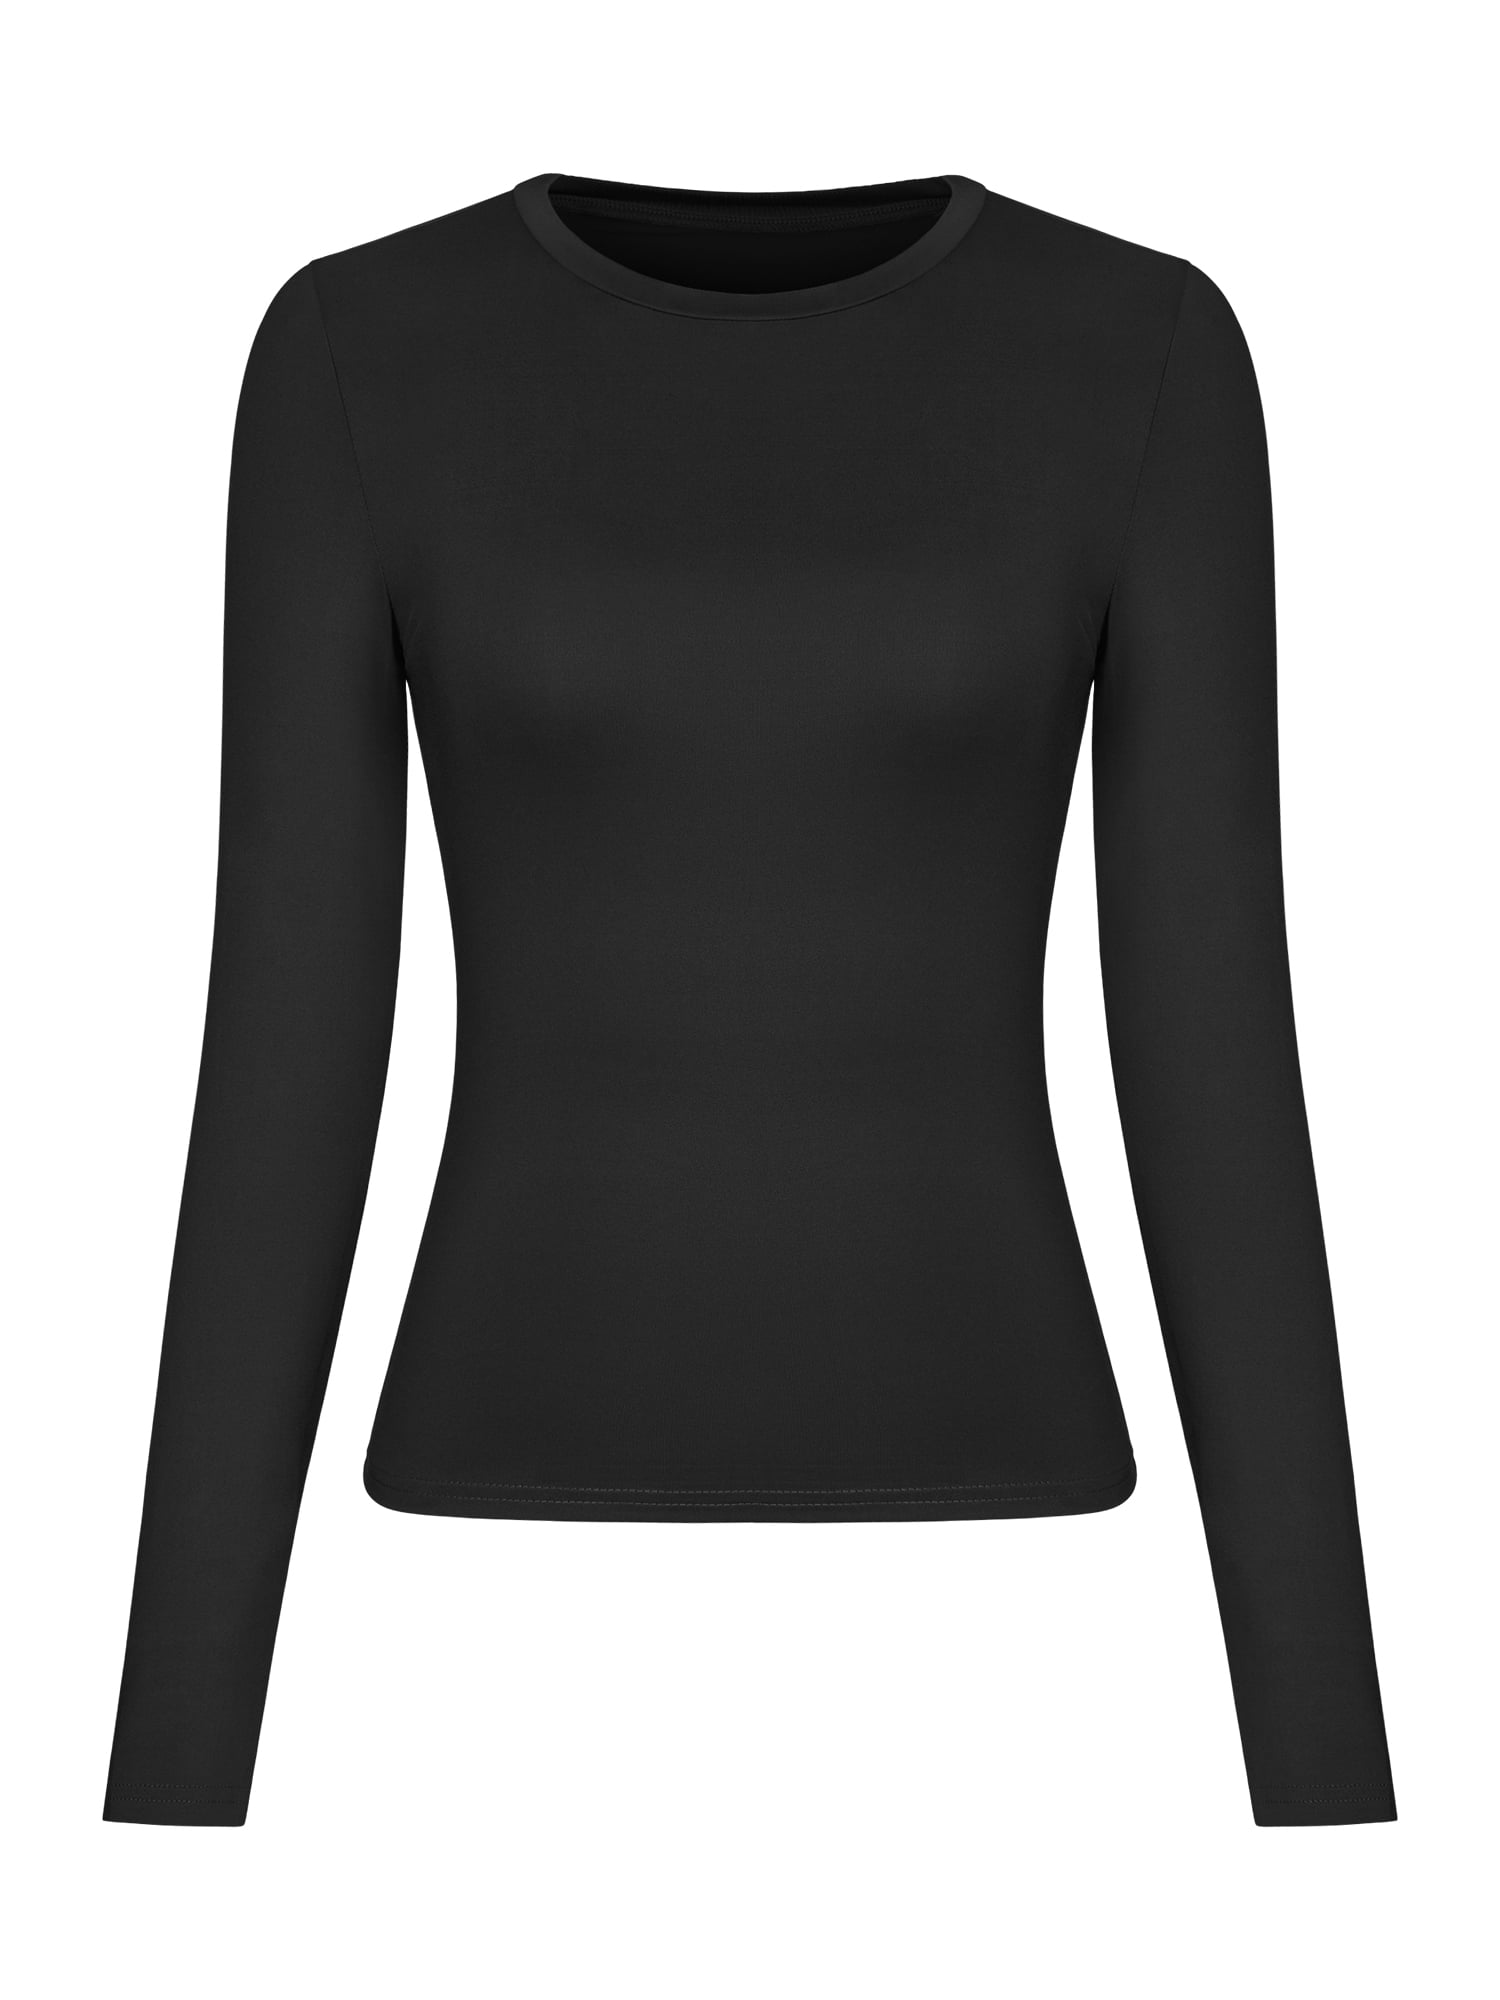 Round Tight Cropped Shirt Shirt Y2K Crop Neck Long Women\'s Solid Basic Workout Fit Sleeve Yoga Top Tee Slim